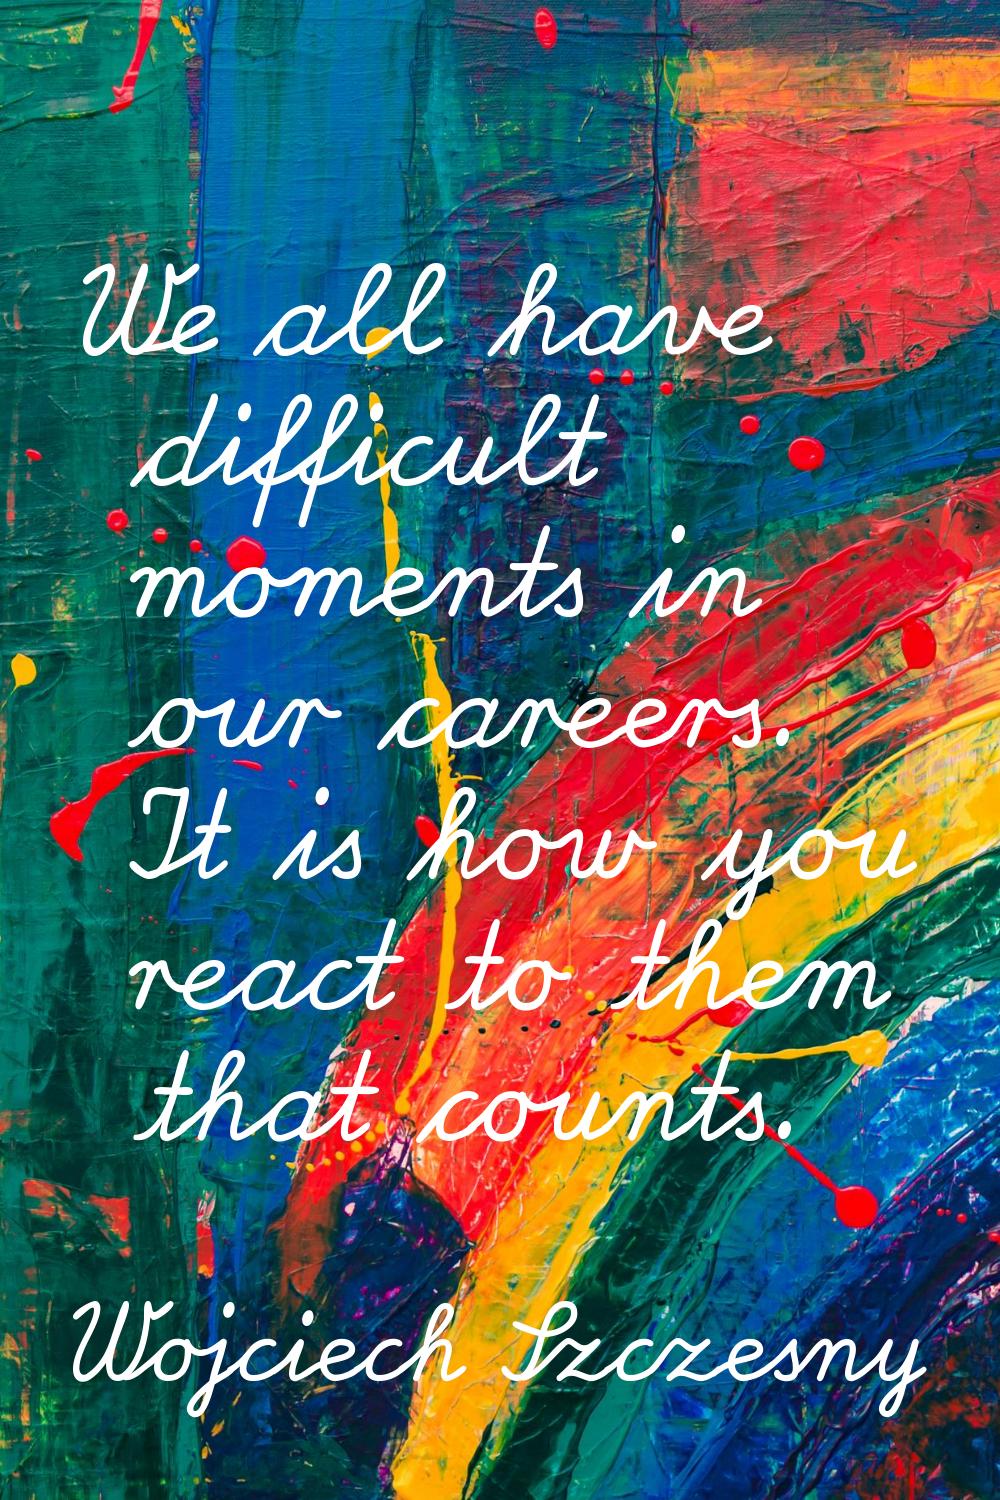 We all have difficult moments in our careers. It is how you react to them that counts.